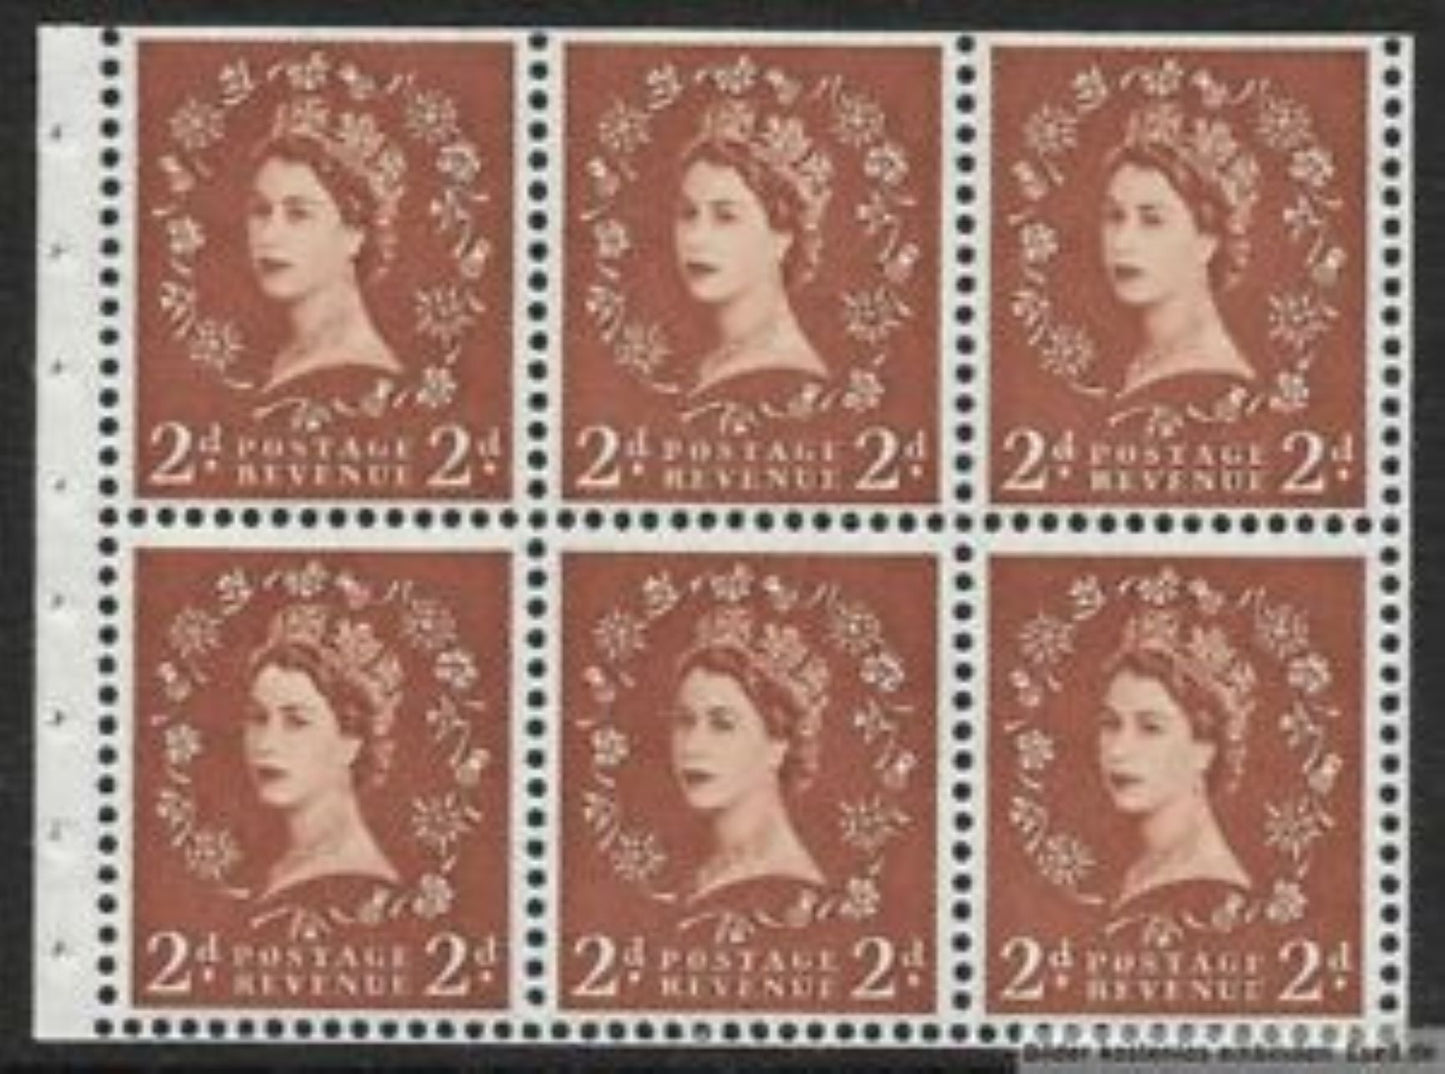 Great Britain SG#H30 5/- Brown Buff & Black Cover 1956-1959 Wilding Issue, A Complete Booklet With Mixed Upright and Inverted St. Edward's Crown Watermark, Panes of 6, Type B GPO Cypher, September 1957